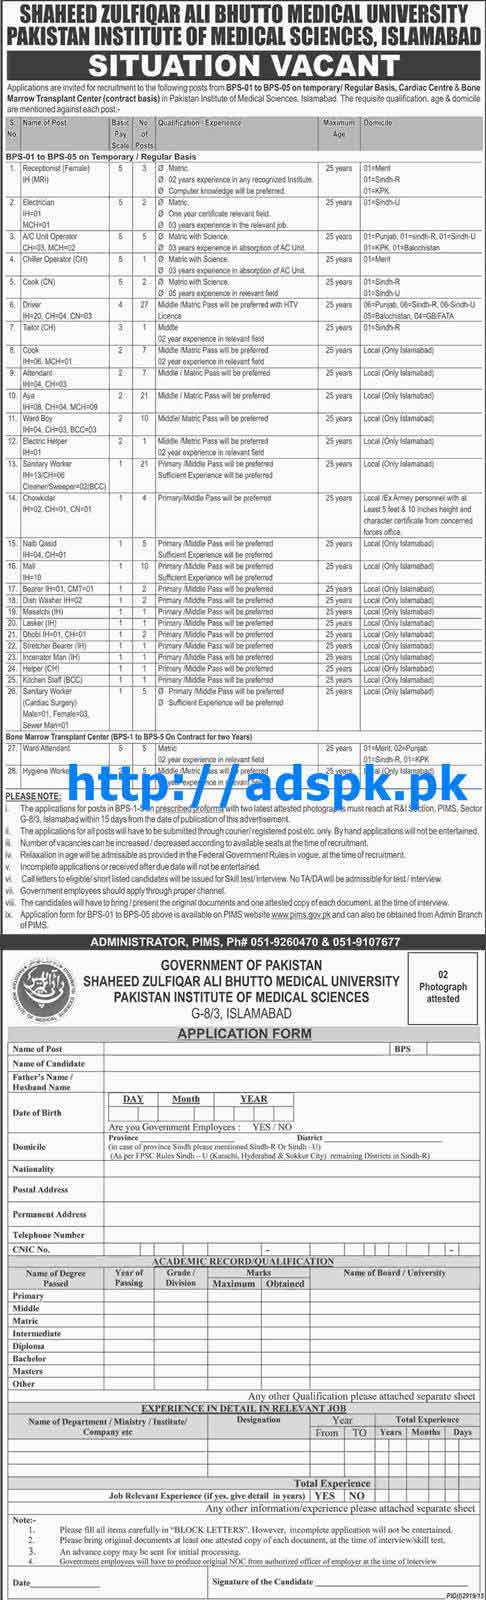 Latest Jobs of Shaheed Zulfikar Ali Bhutto Medical University PIMS Islamabad Jobs 2015 for BPS-01 to BPS-05 & BPS-06 to BPS-15 Steno Typist Statistical Assistant Receptionist (Female) Electrician and other Technical New Jobs Last Date 25-12-2015 Apply Now